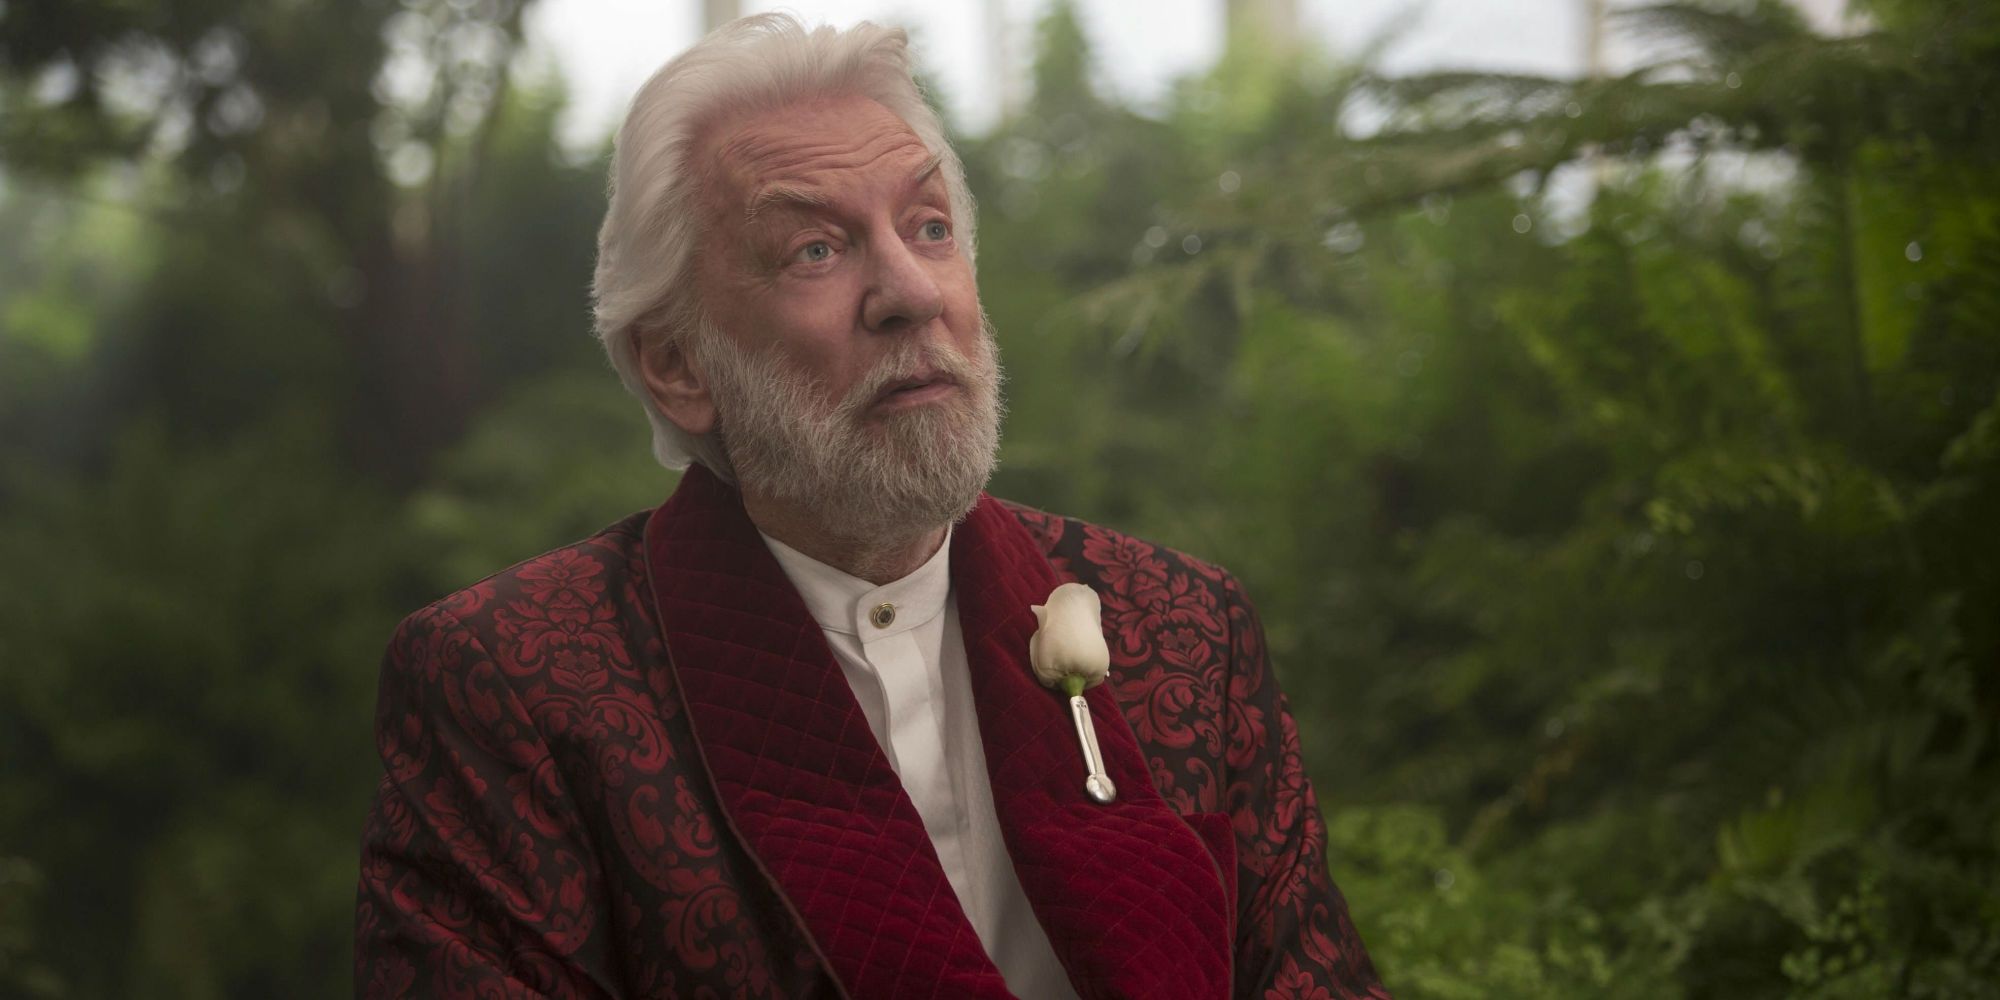 President Snow in his rose garden in The Hunger Games